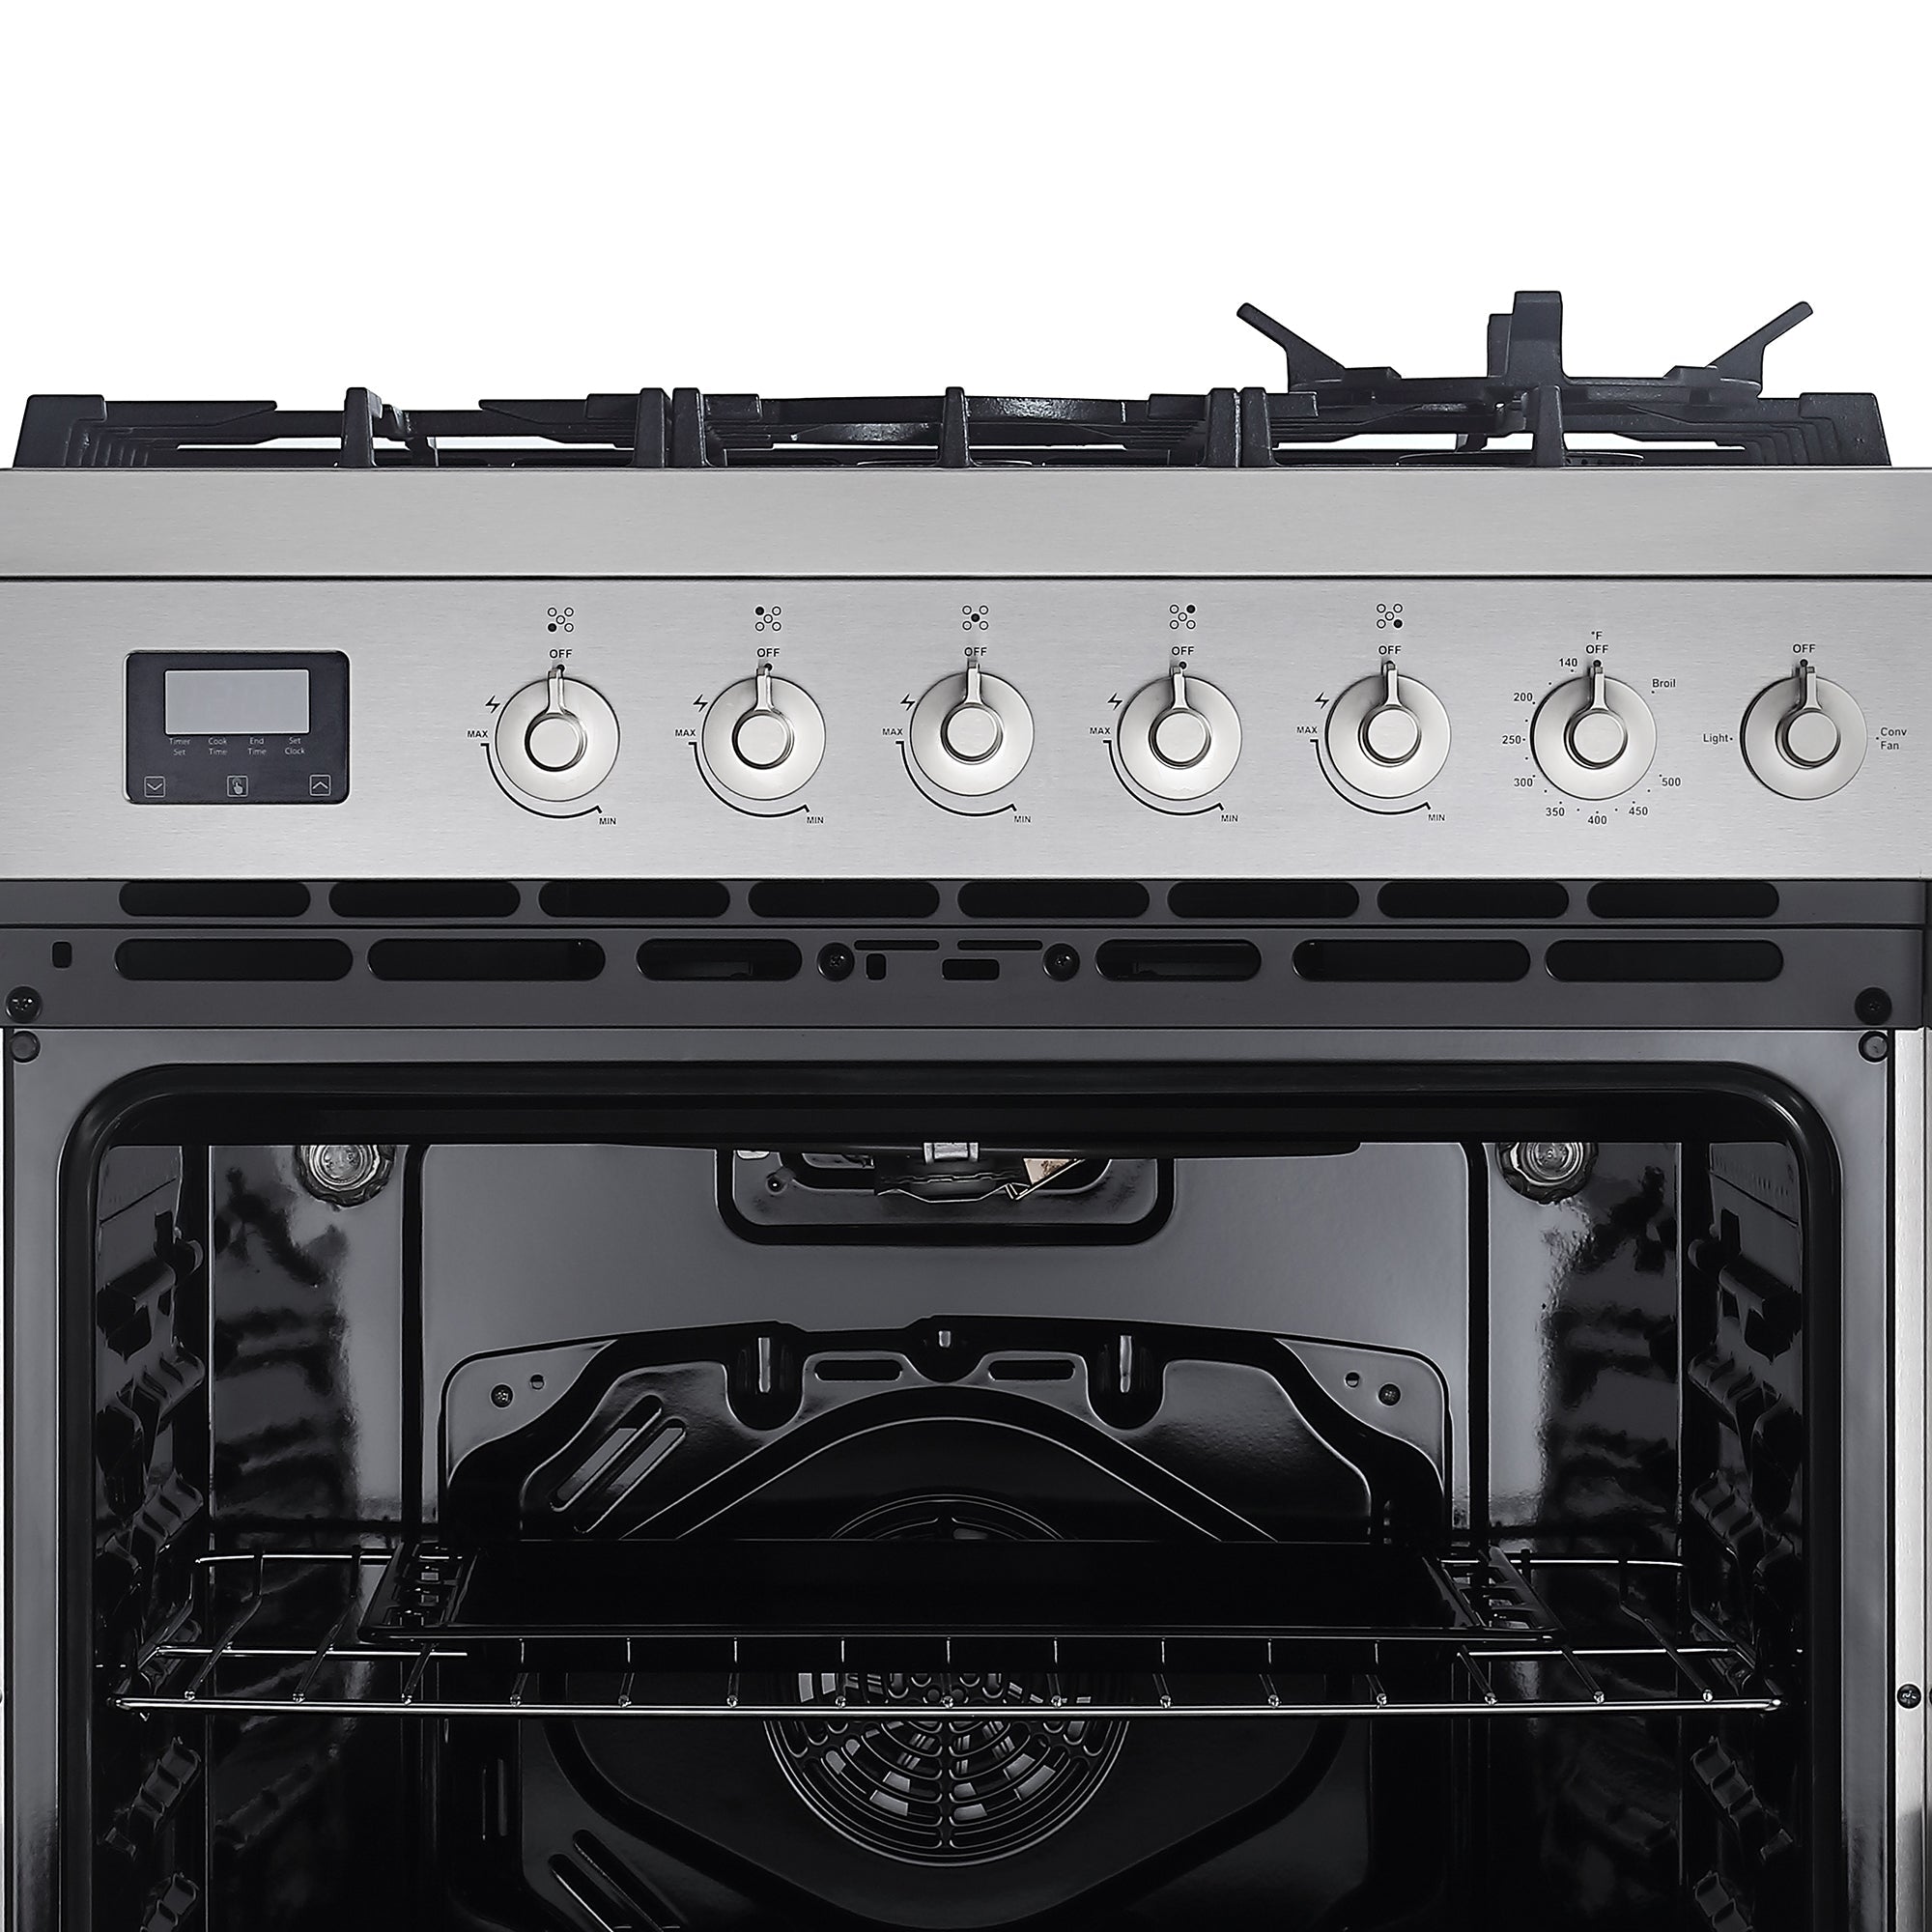 30 Inch Freestanding Range Gas Cooktop And Oven - EMPV-30GR06-10